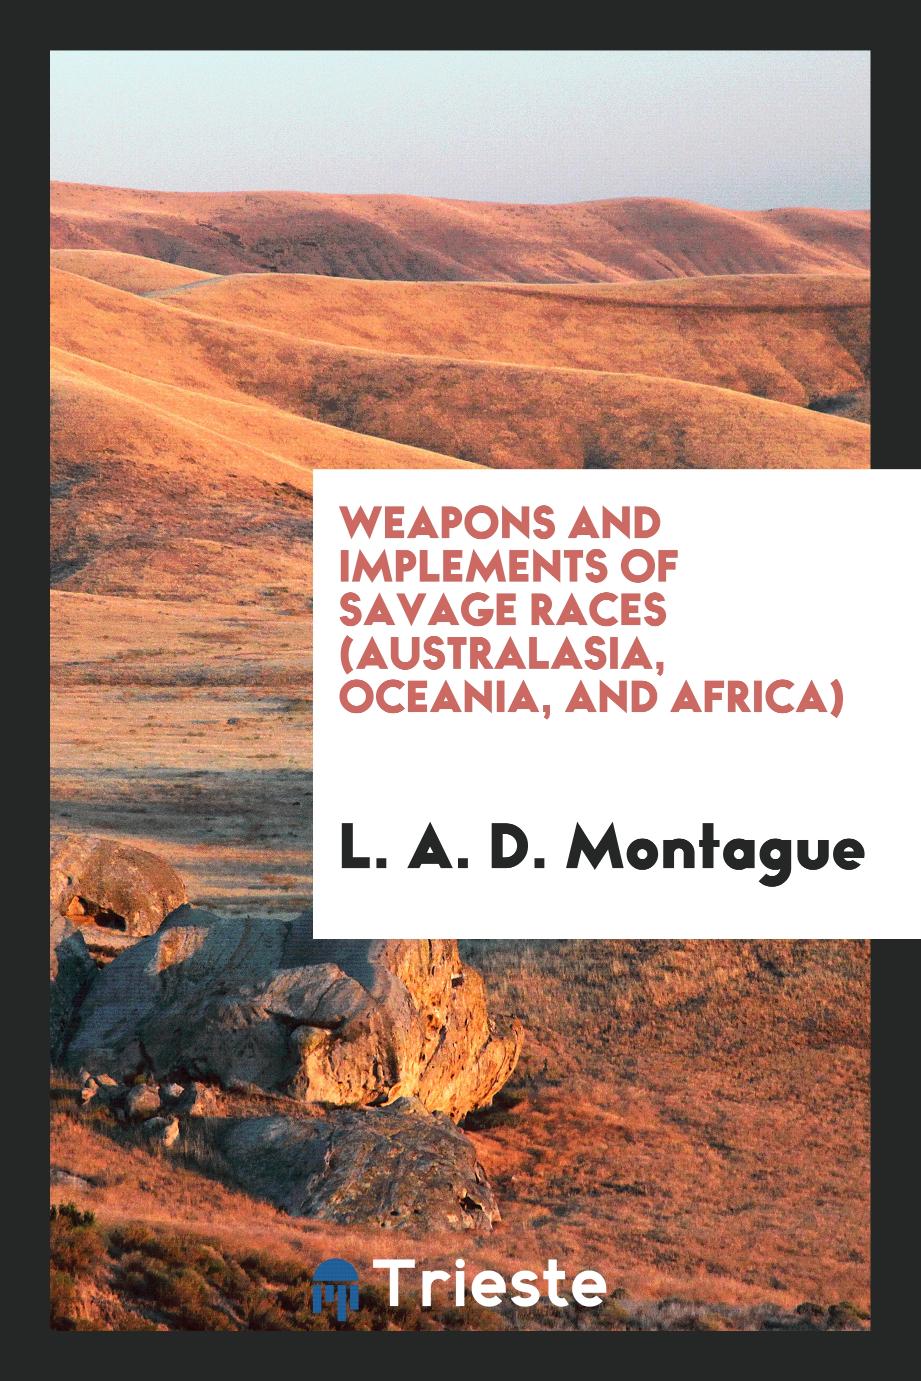 Weapons and implements of savage races (Australasia, Oceania, and Africa)